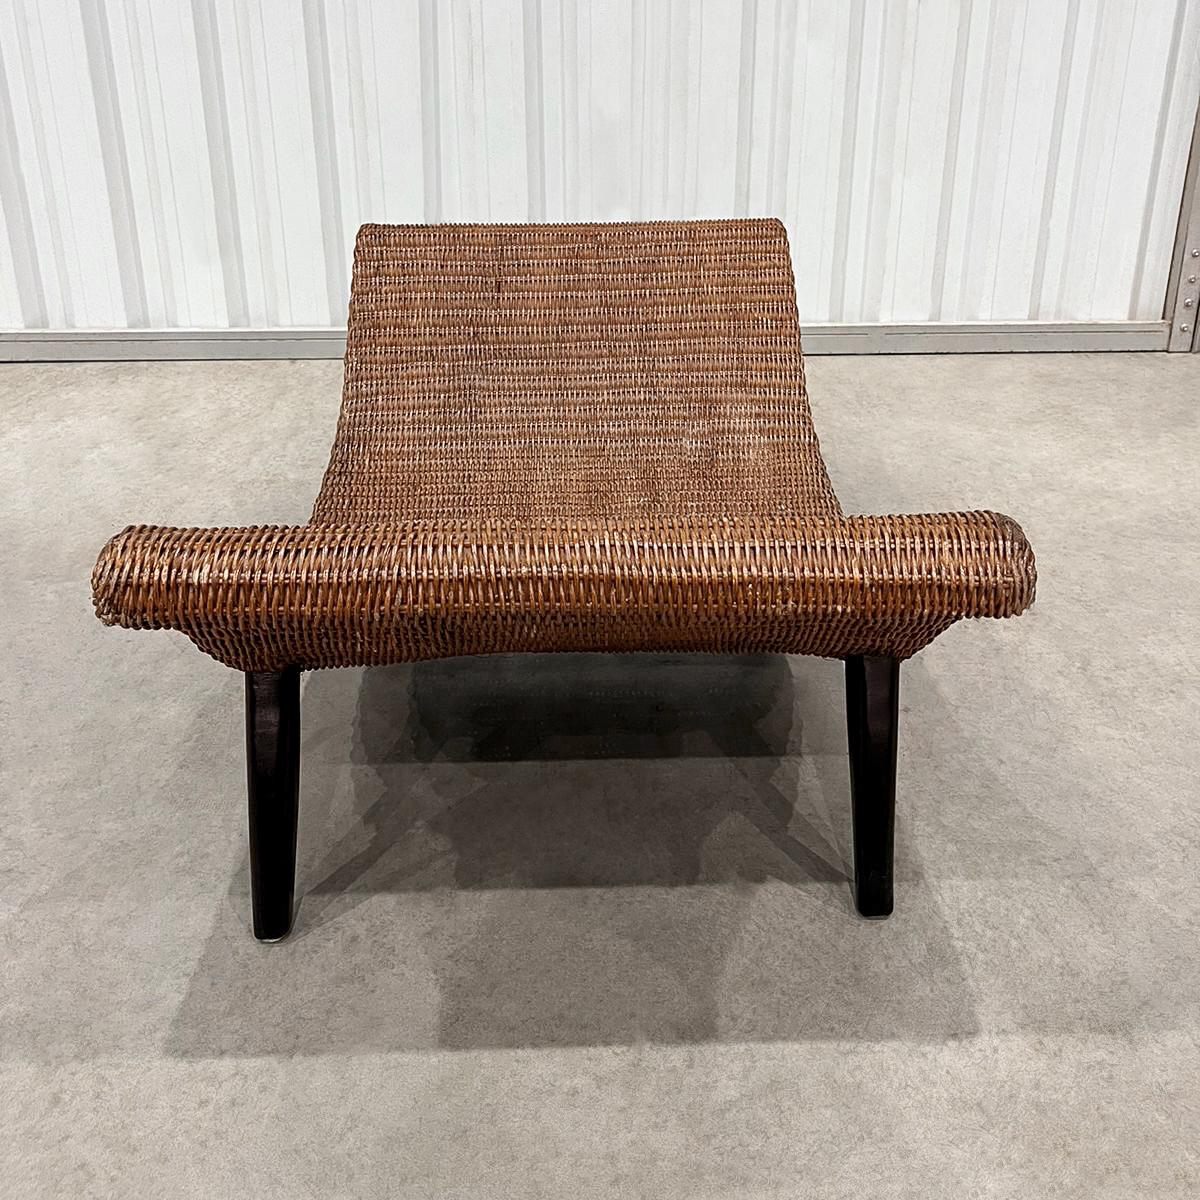 U-shaped Bench in Hardwood & Wicker, Unknown, Brazil, c. 1960 In Good Condition For Sale In New York, NY